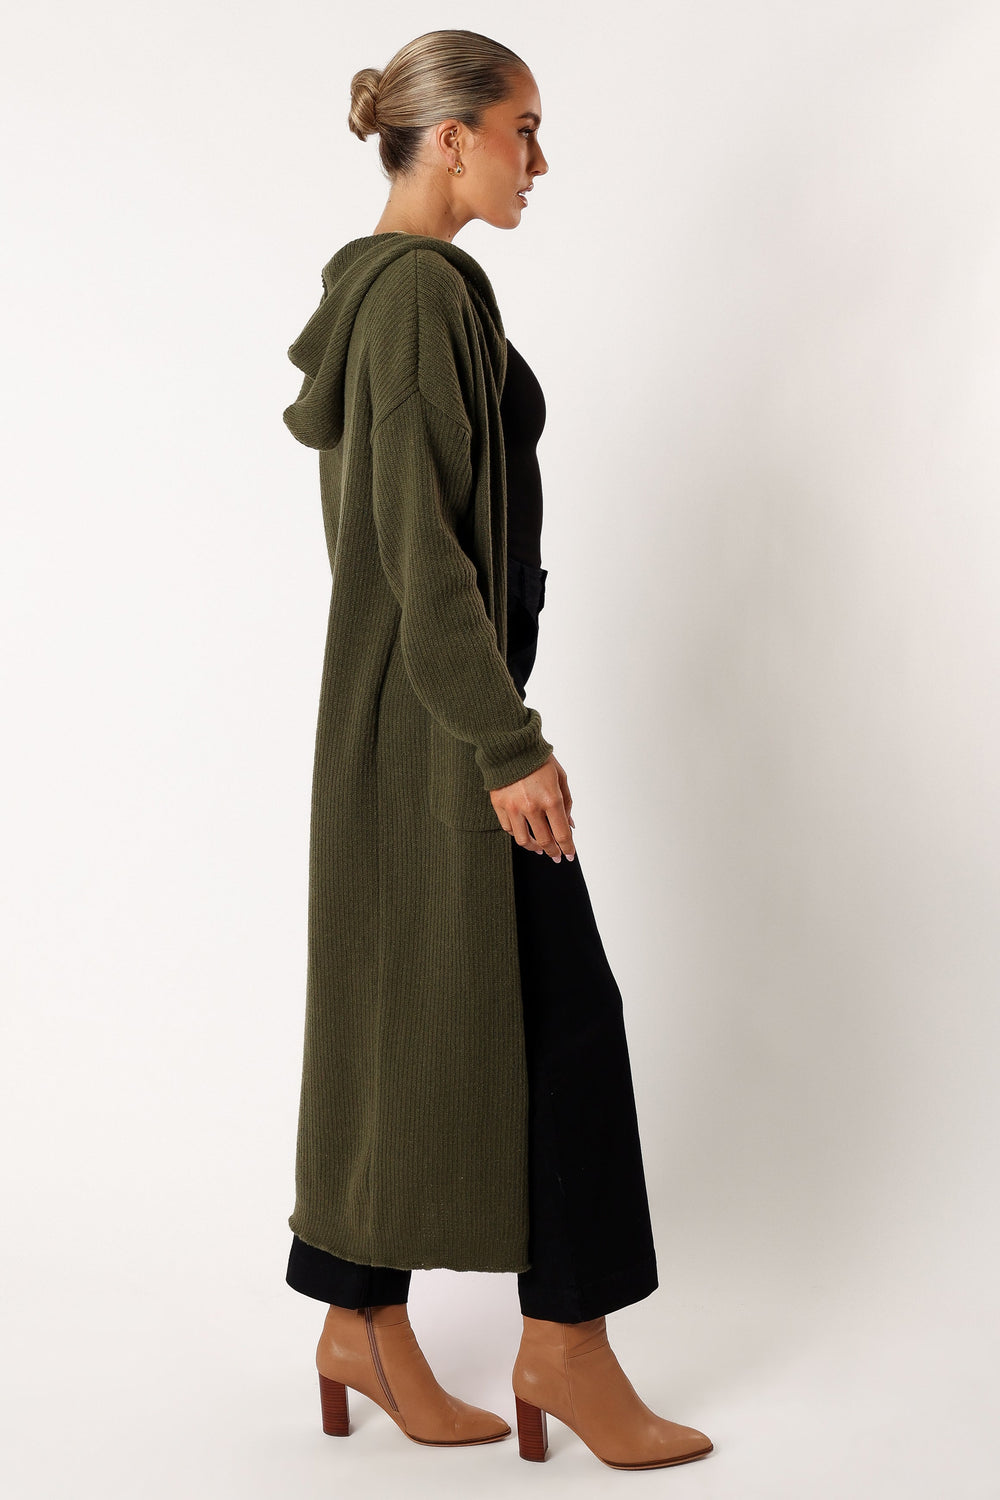 Petal and Pup USA KNITWEAR Valery Long Cardigan - Olive